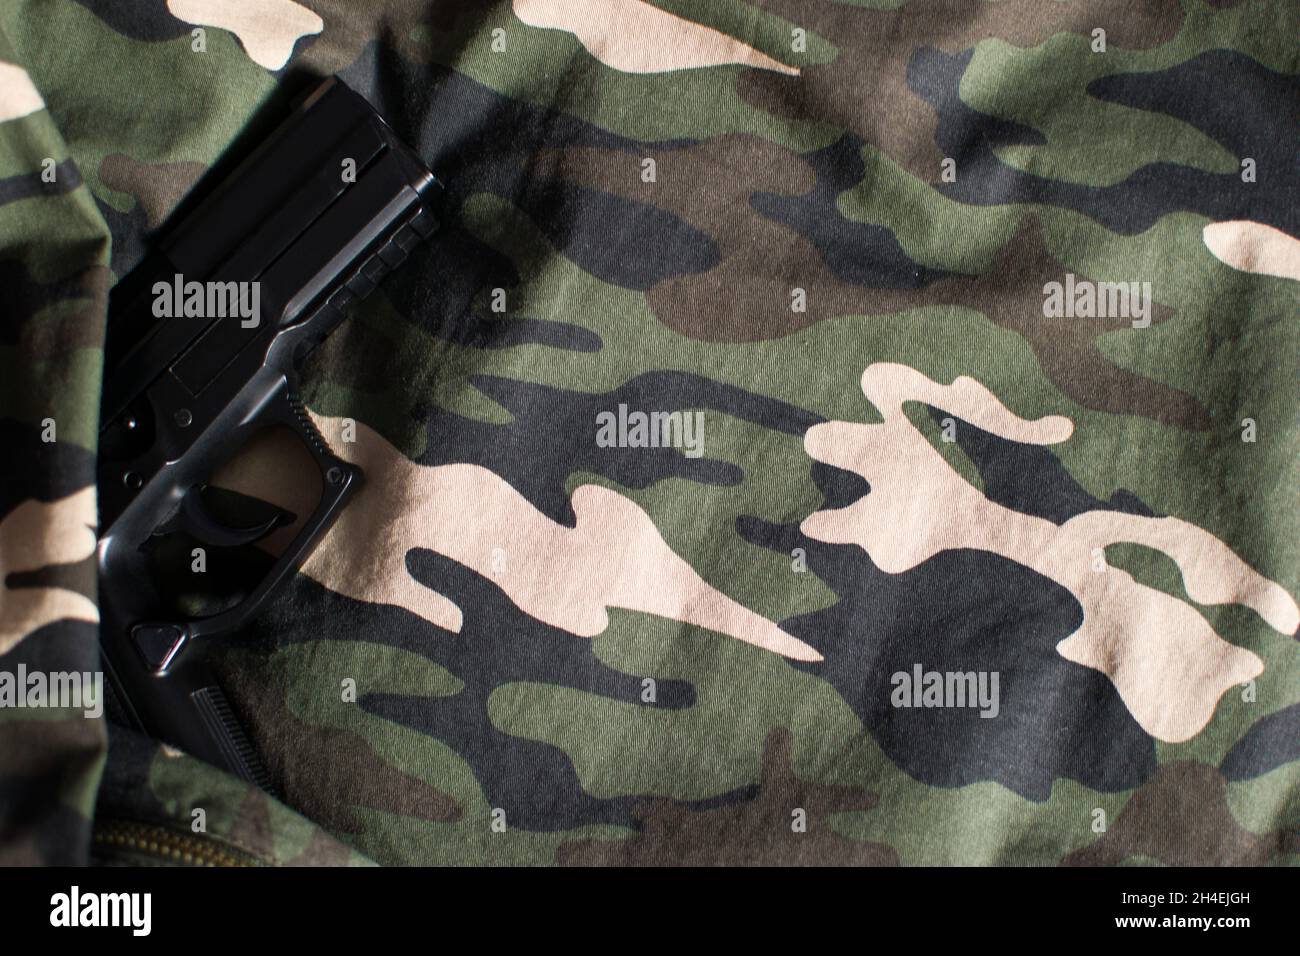 Black handgun on camouflage military uniform background with copy space Stock Photo